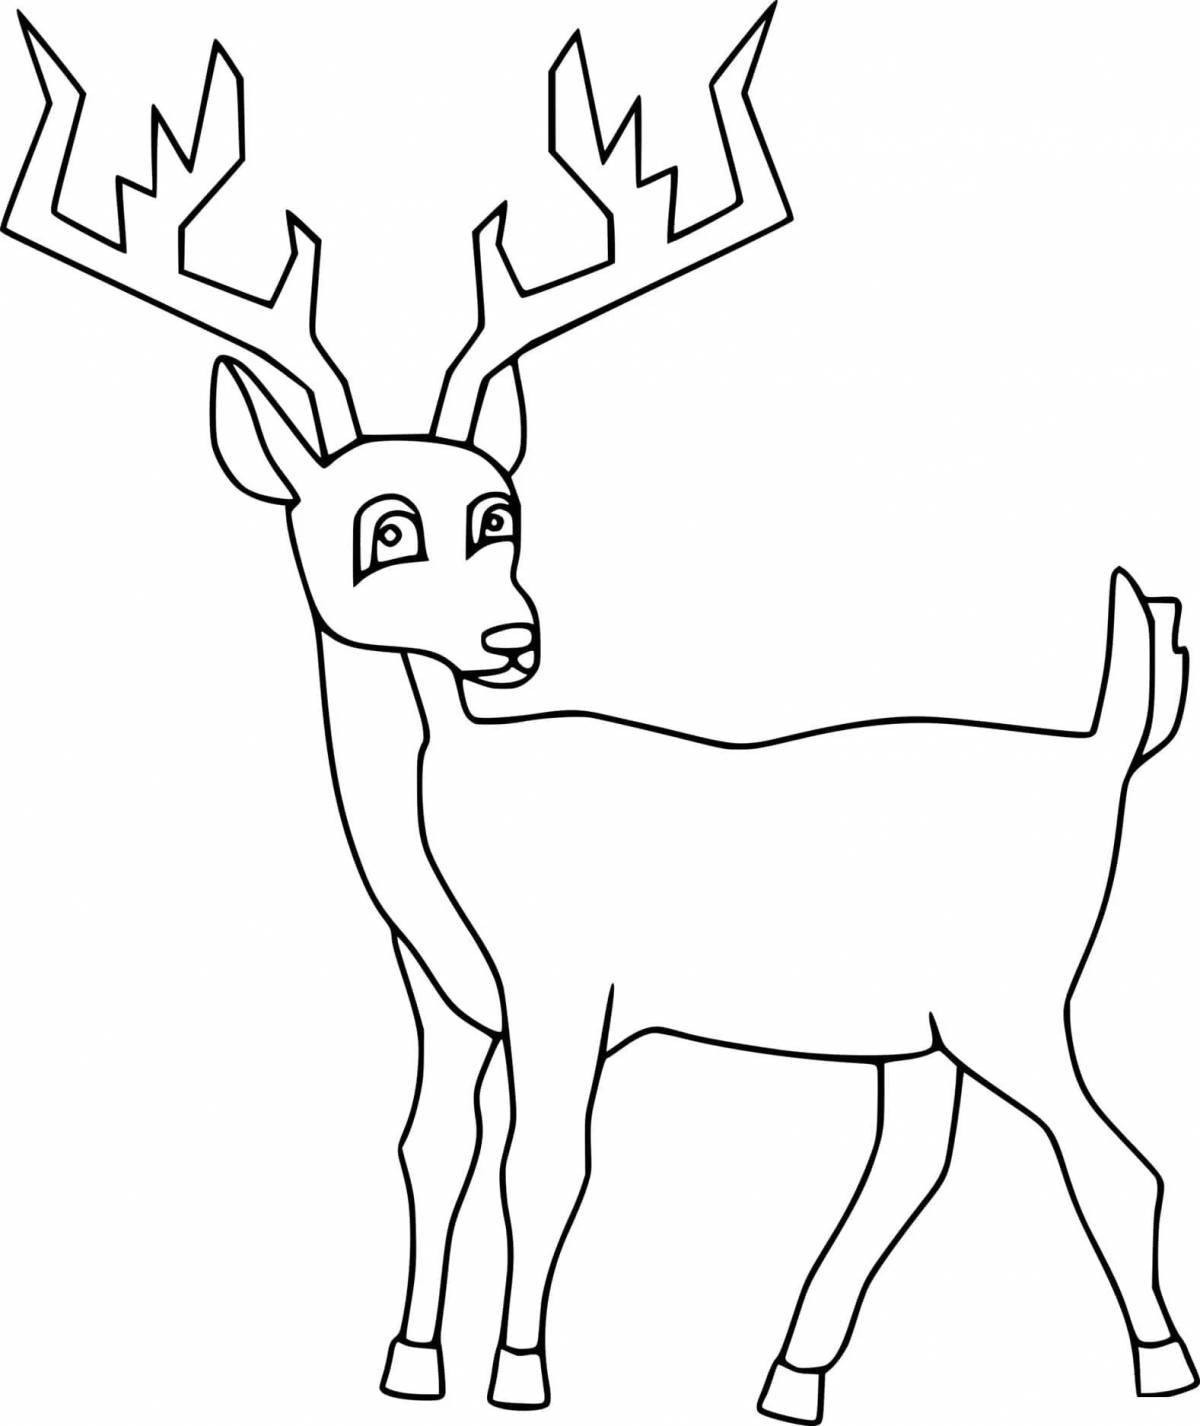 Red deer coloring page charm